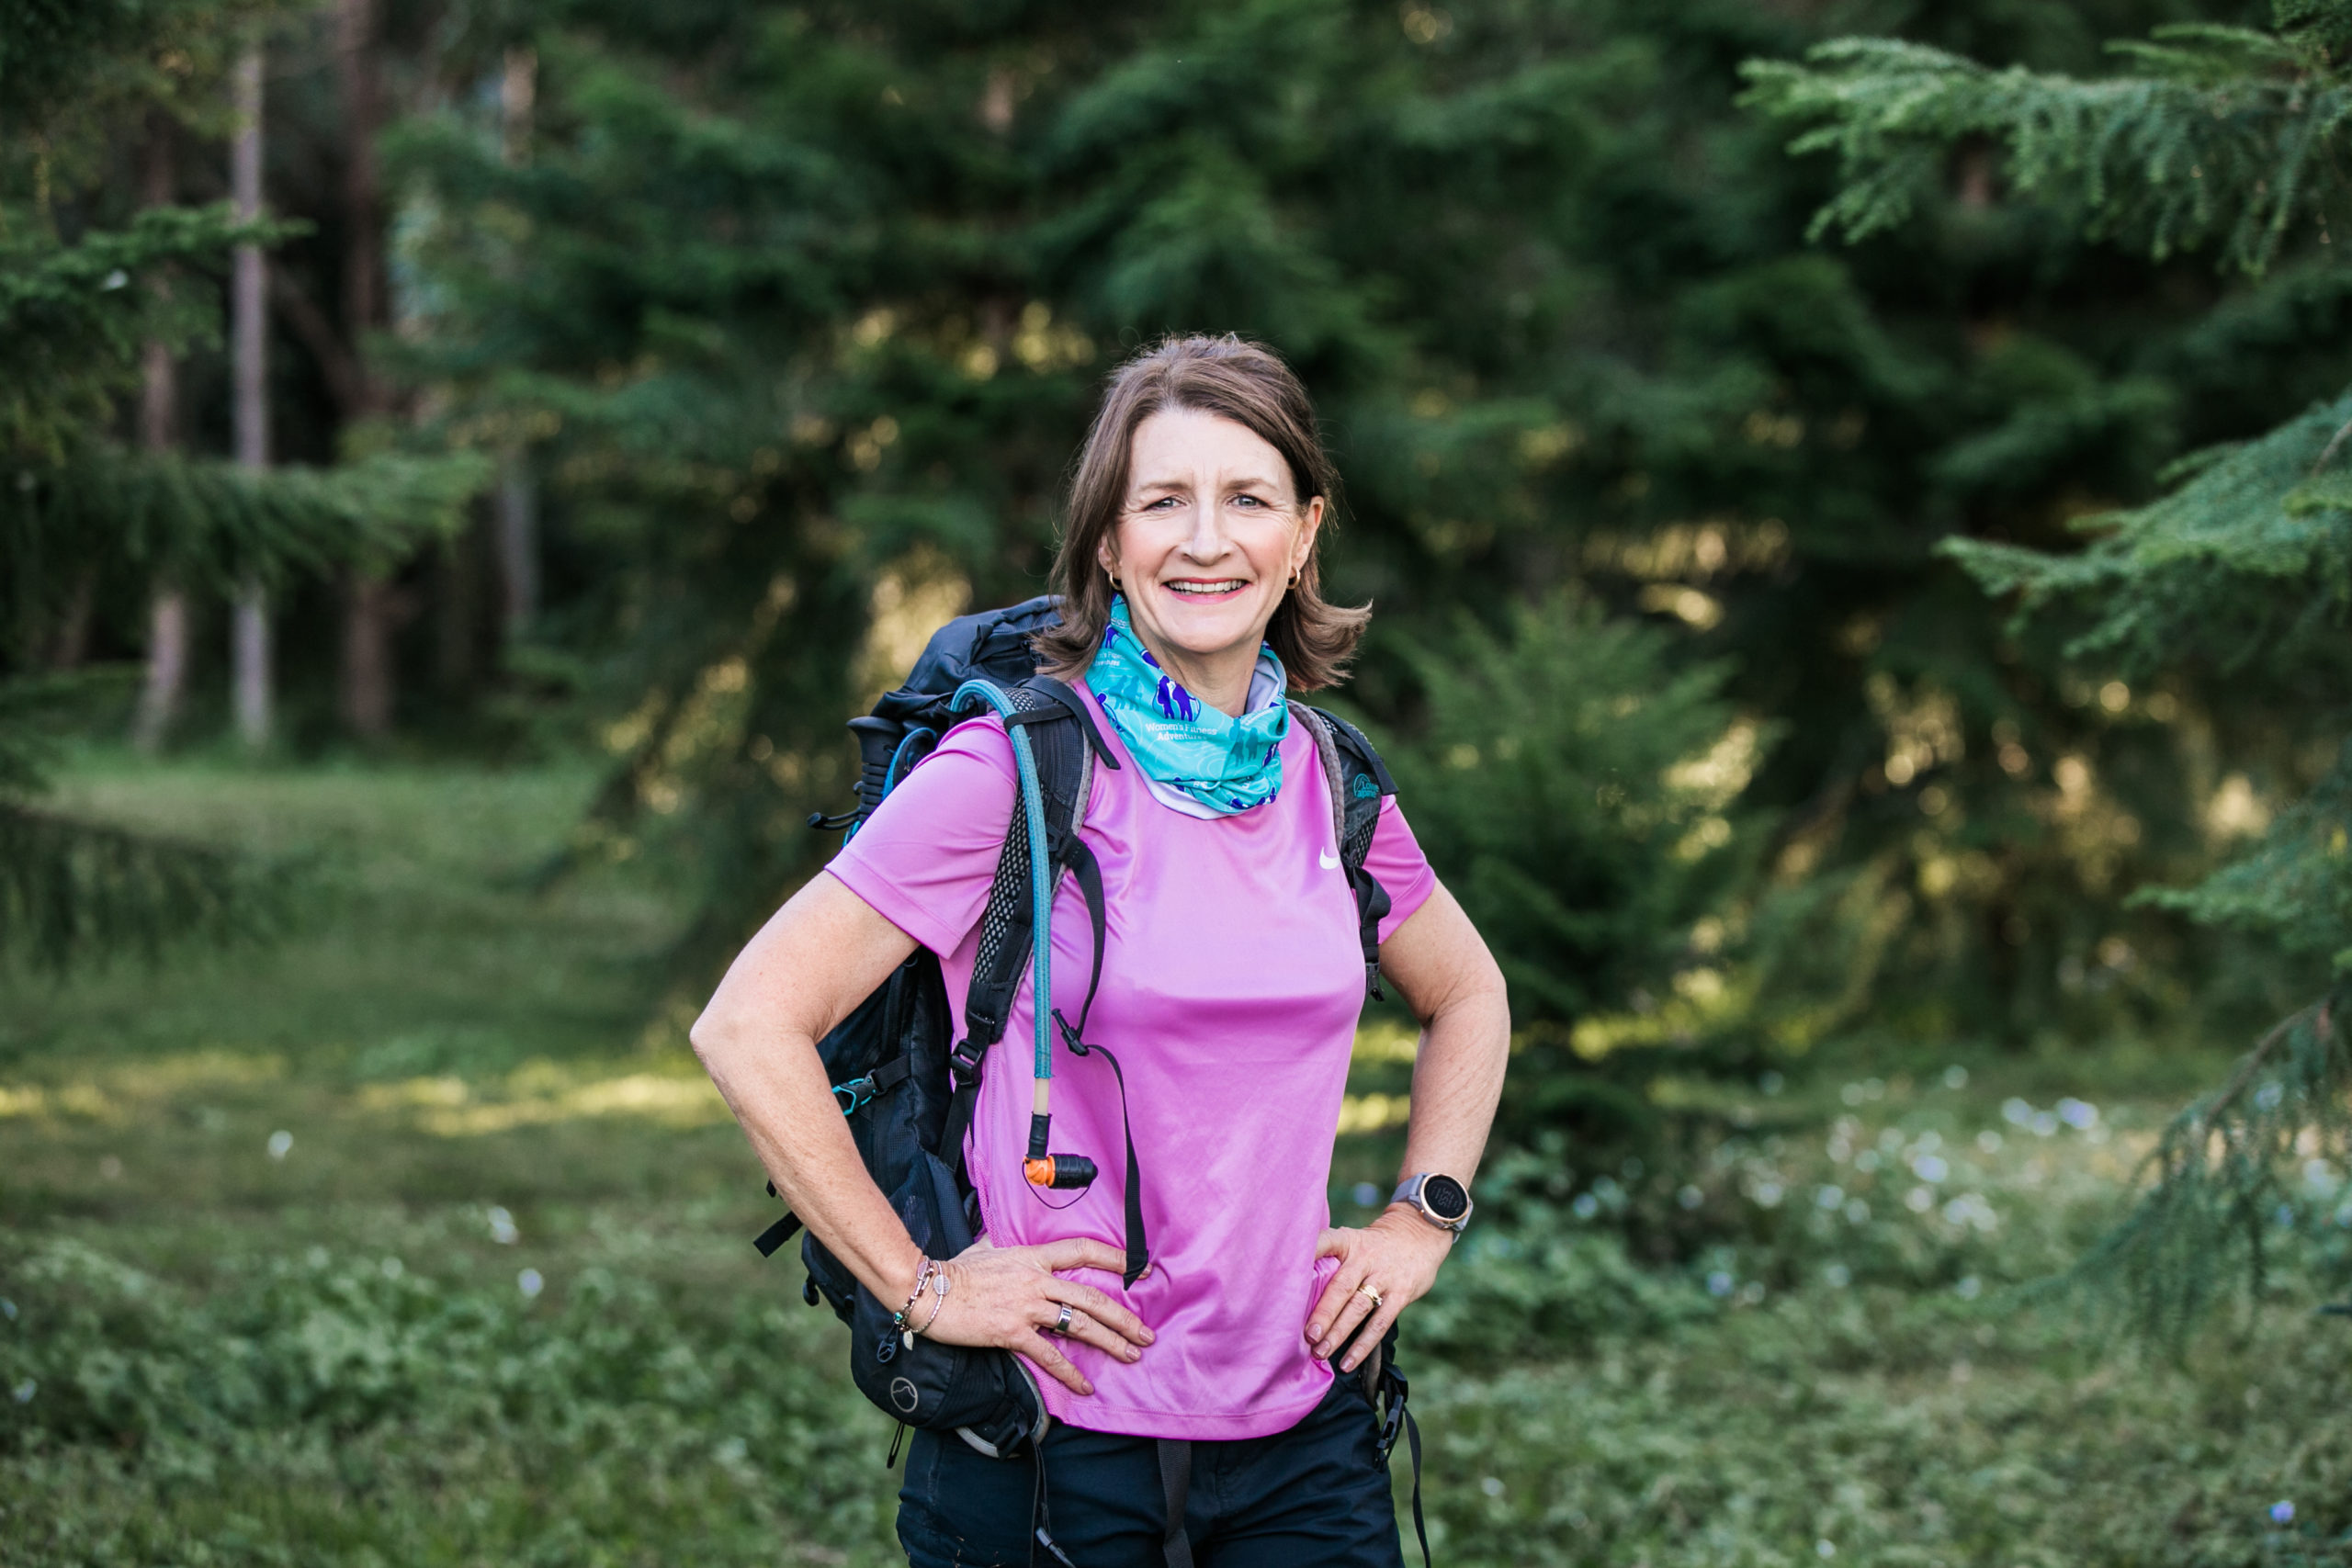 Yvonne Shepherd is the Founder & CEO of Women's Fitness Adventures